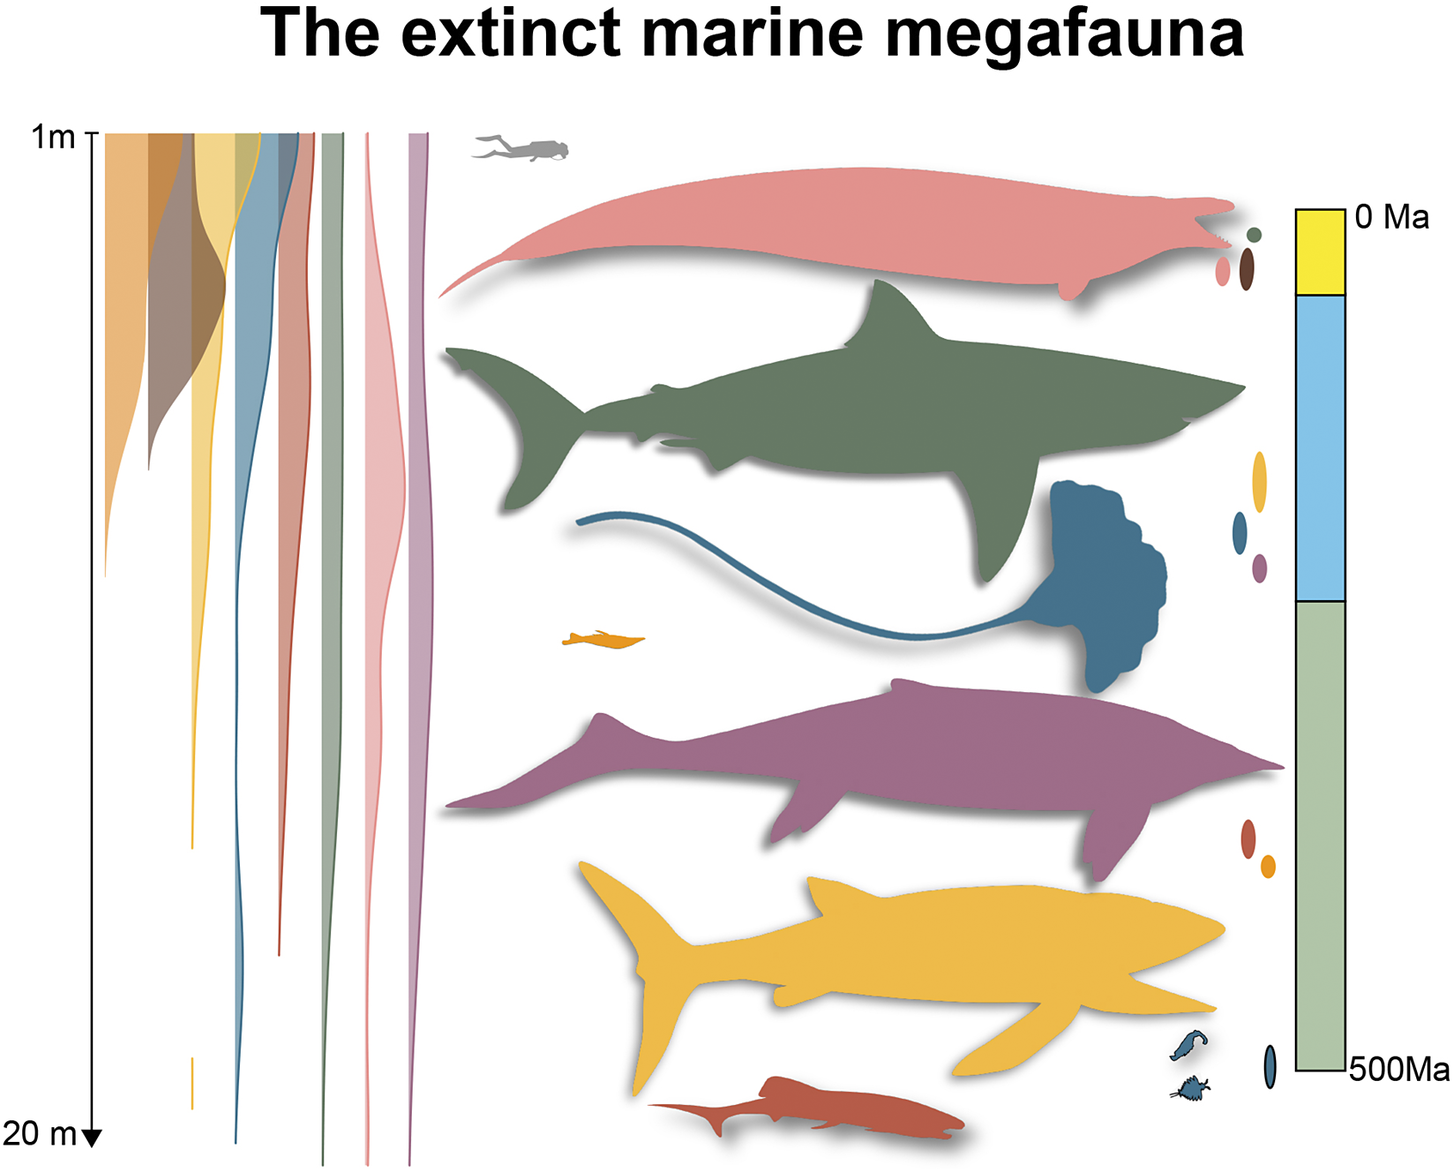 graphical abstract for The extinct marine megafauna of the Phanerozoic - open in full screen